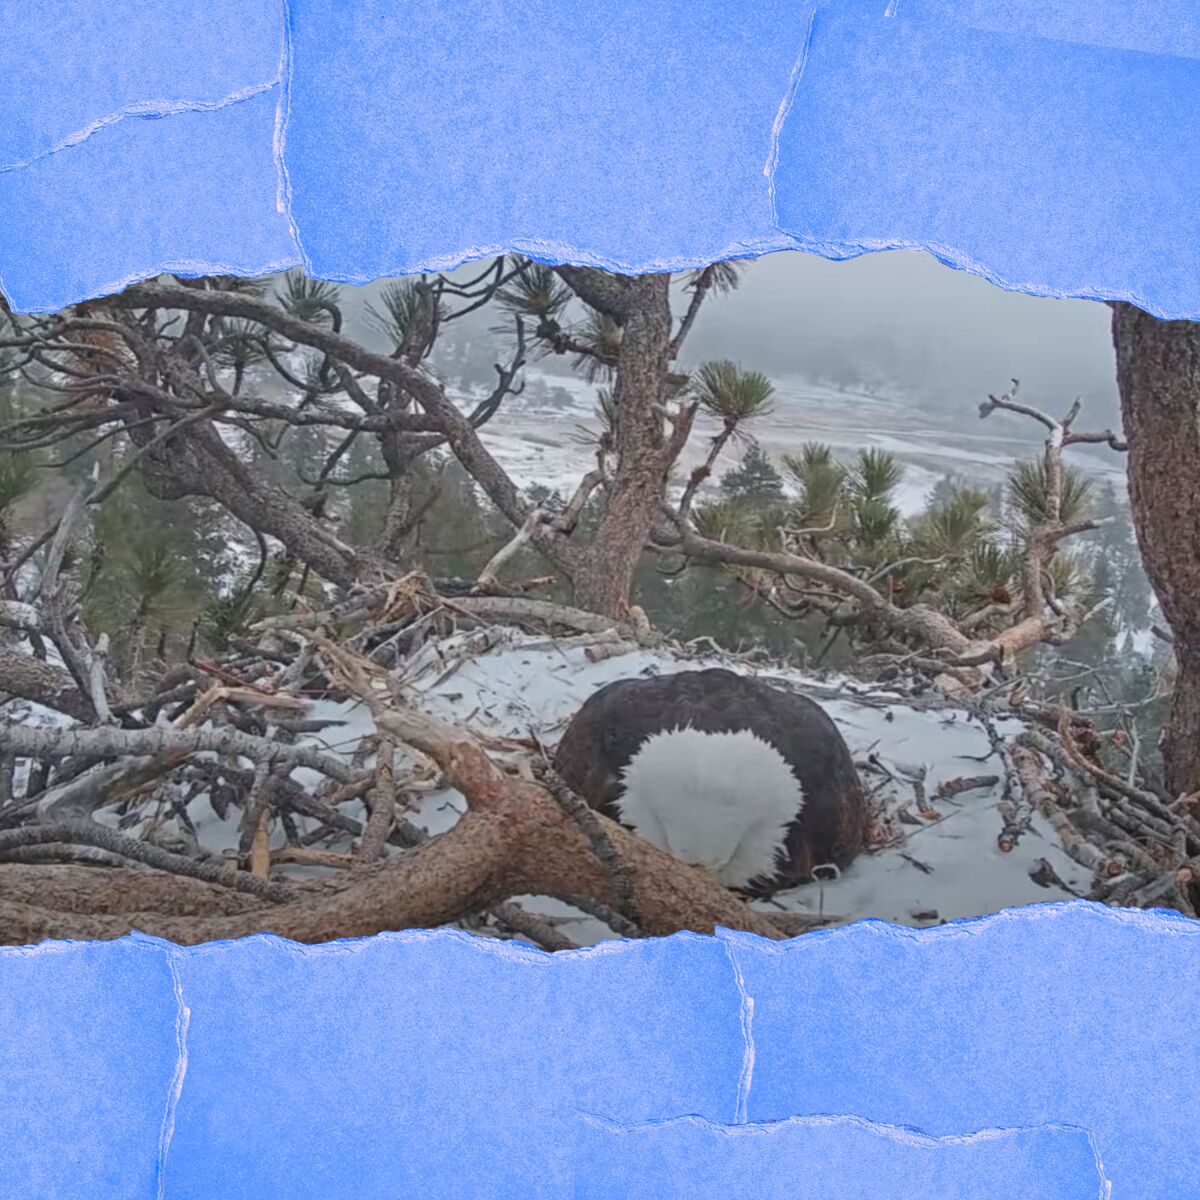 A bald eagle in a snowy nest.